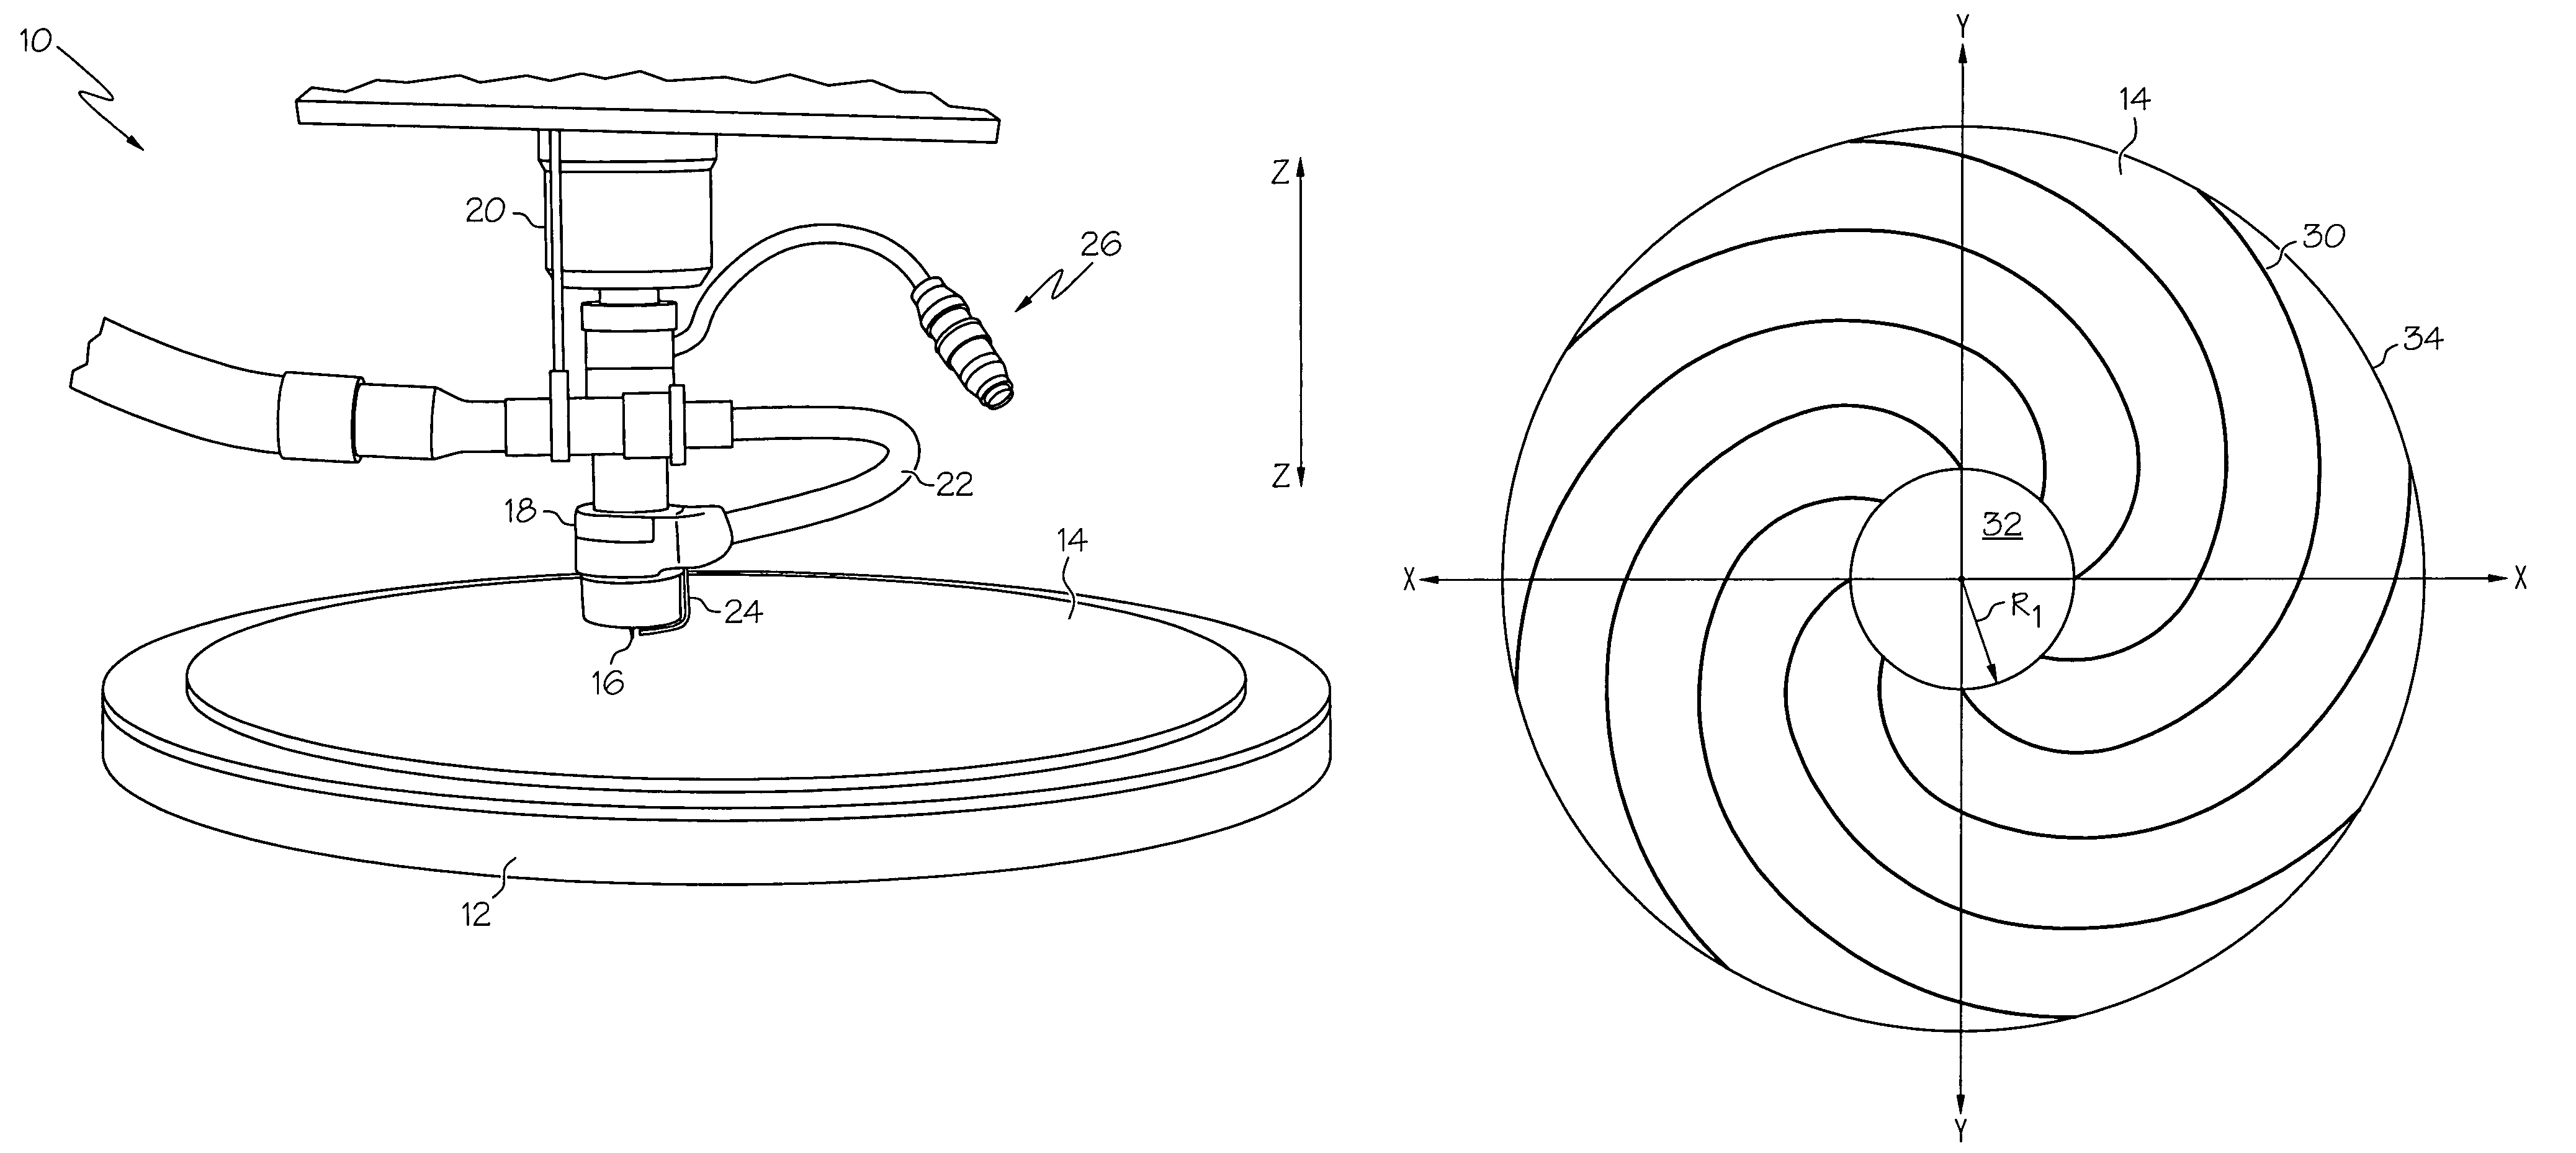 Curved grooving of polishing pads